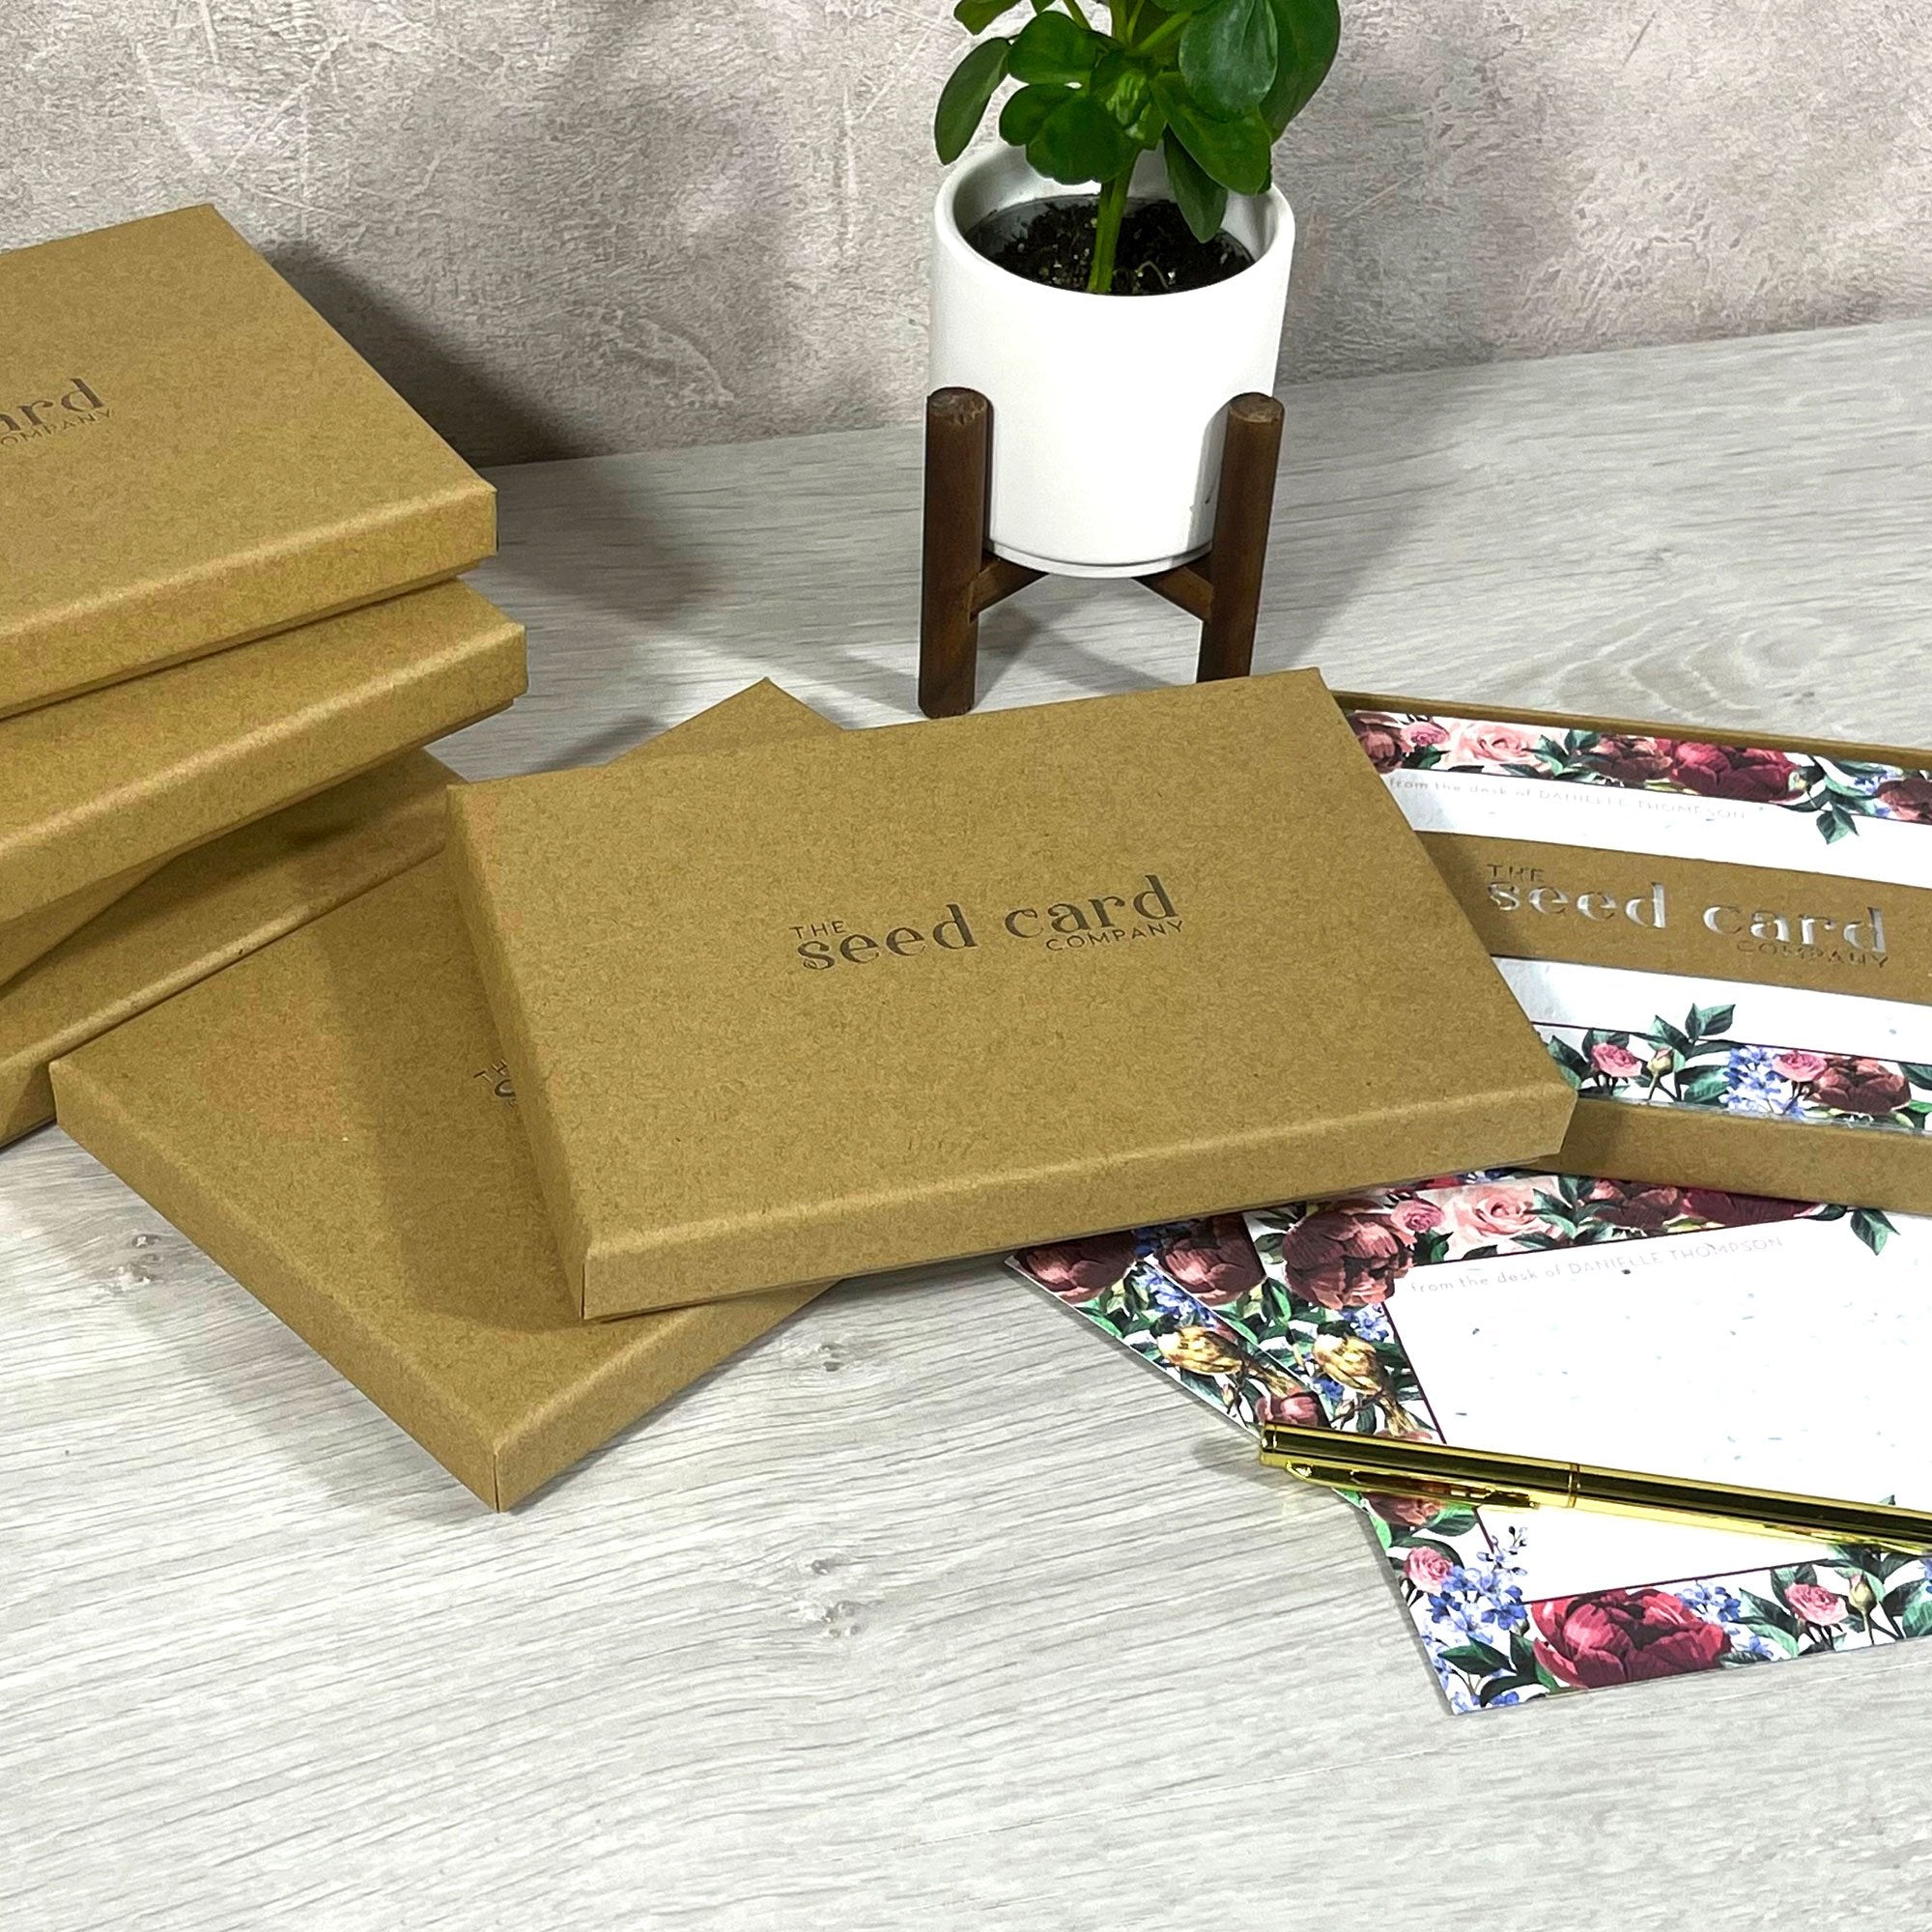 Shop online Monochrome Monogram - 100% biodegradable seed-embedded cards Shop -The Seed Card Company